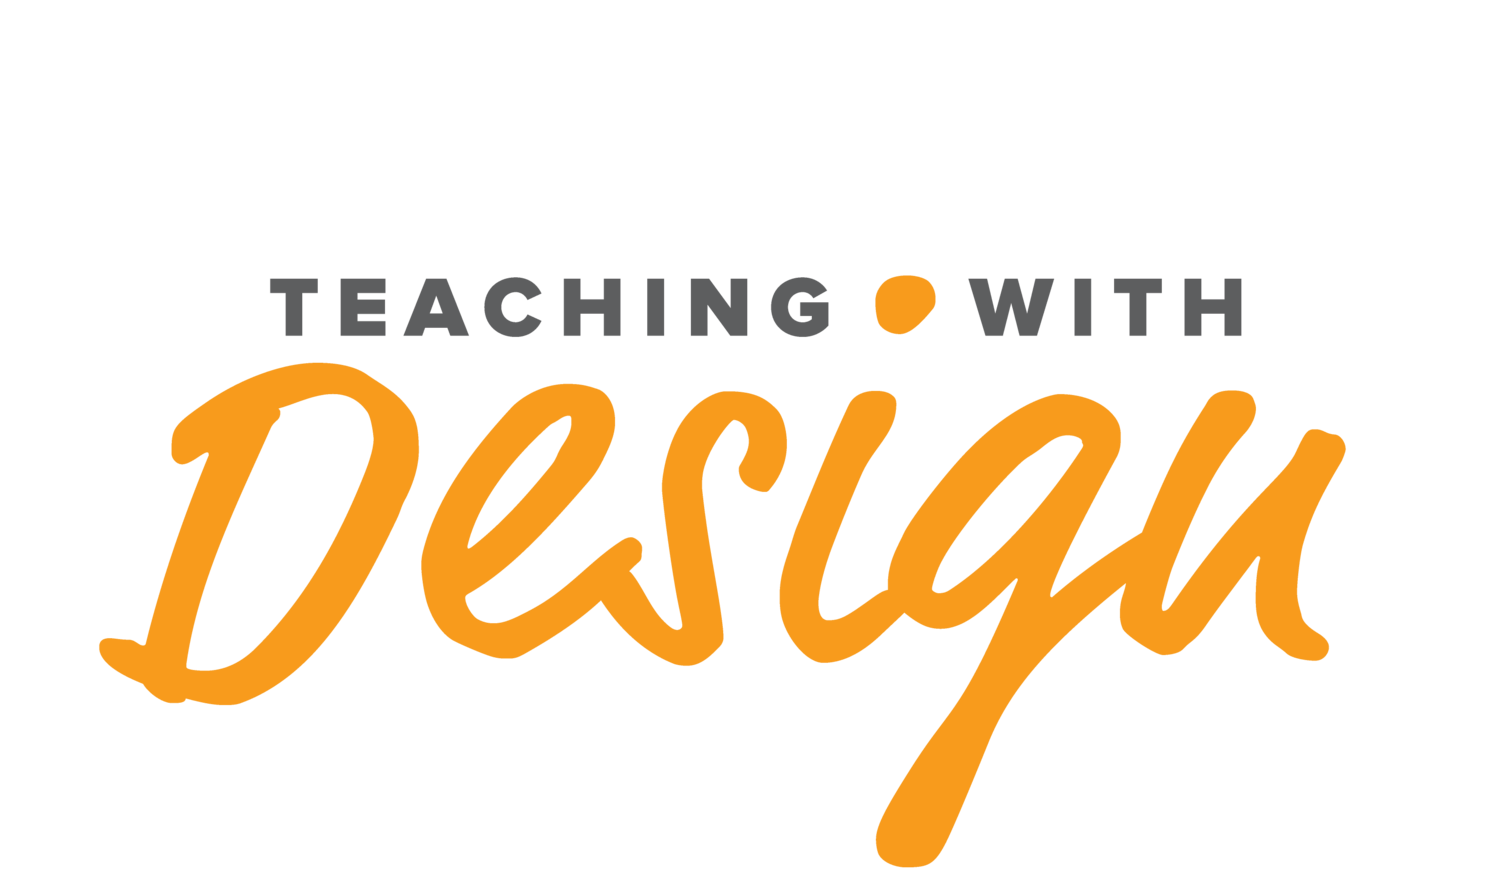 How to plan a multidisciplinary project‐based learning design